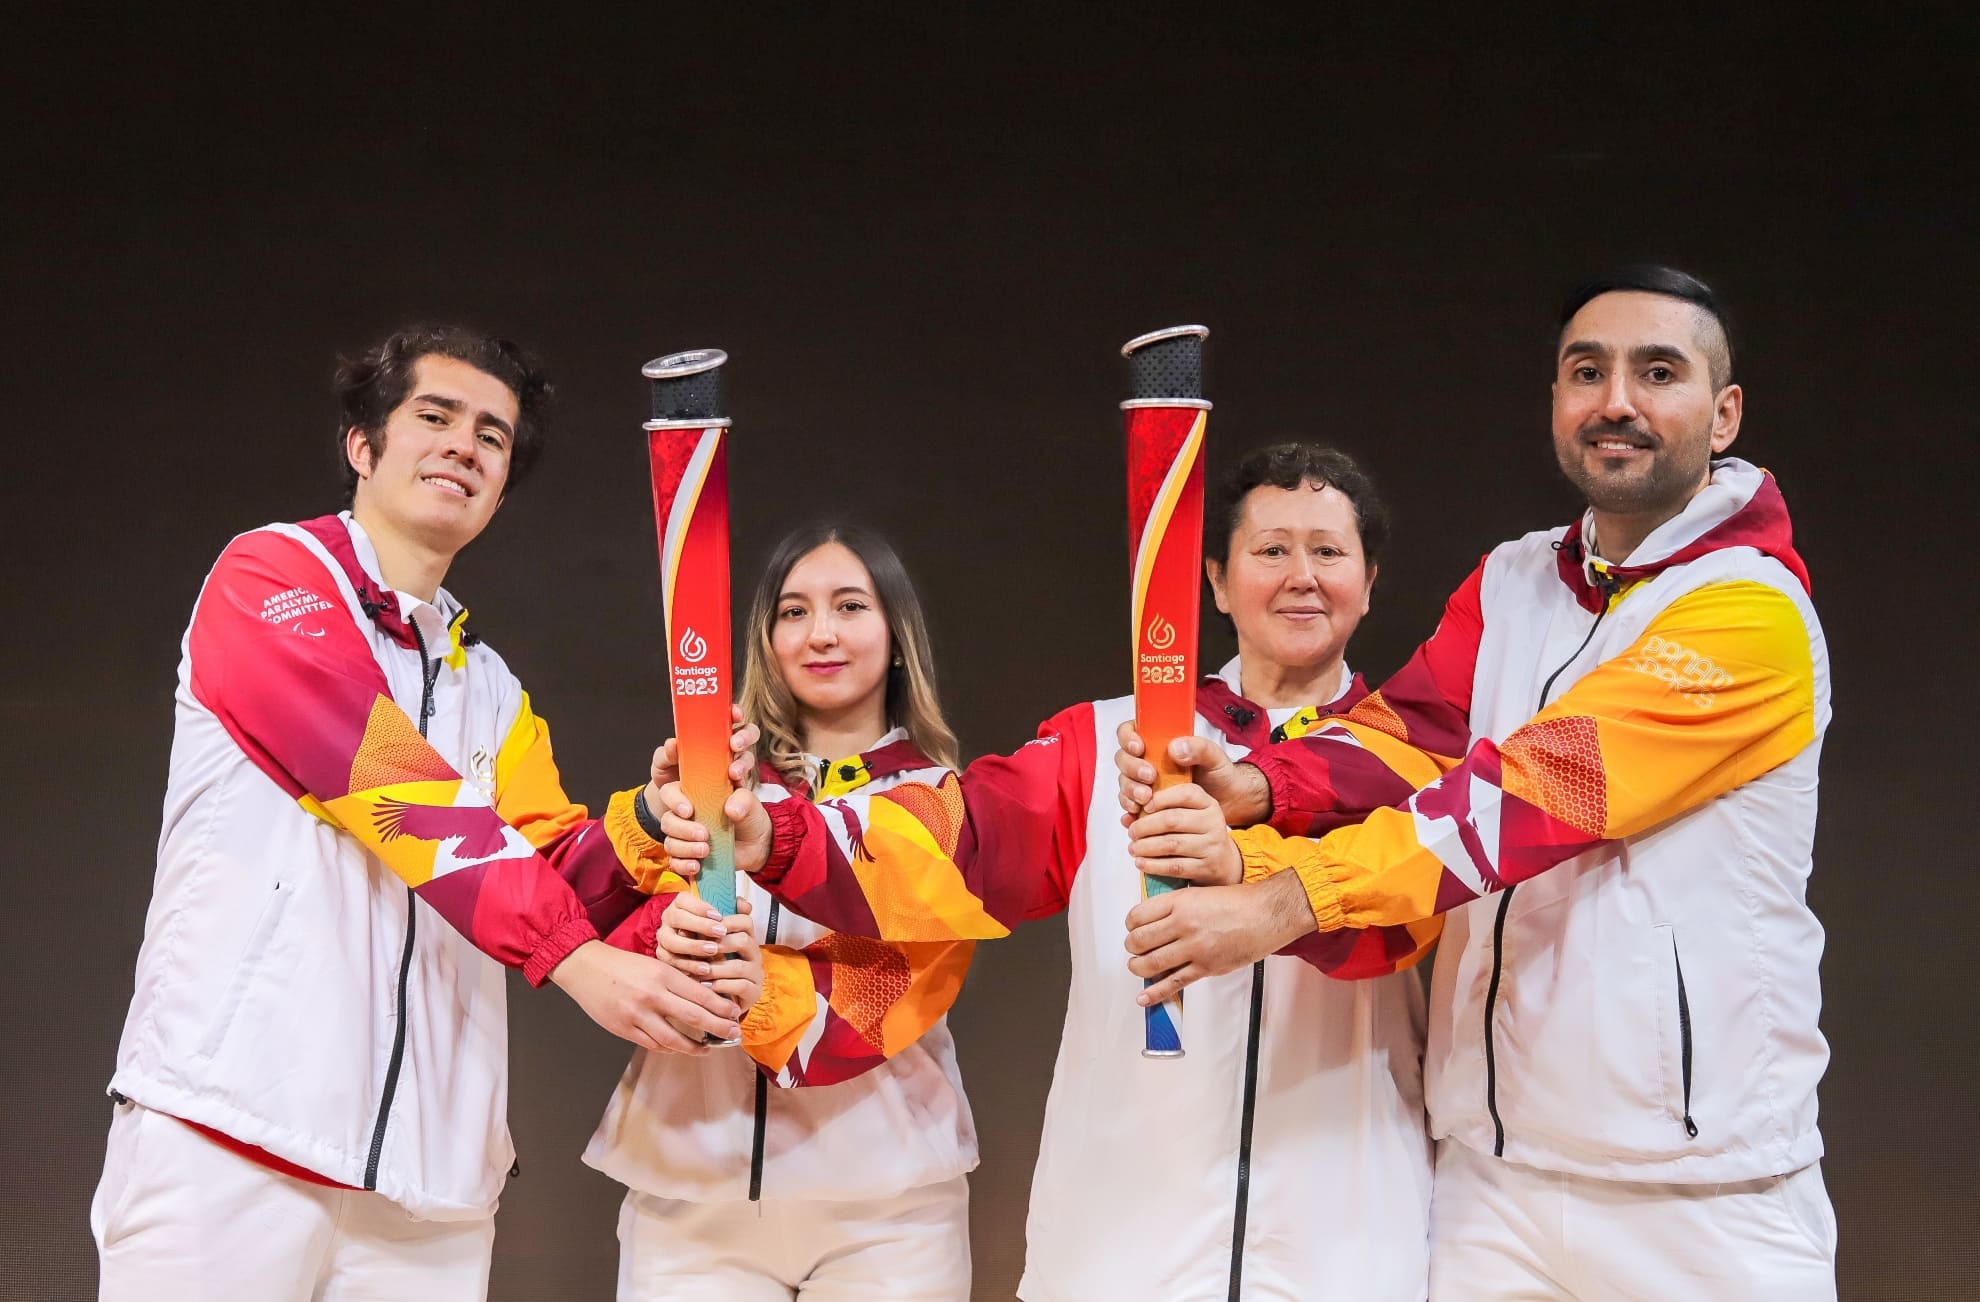 Discover all about the Pan american and Parapan american torchs relay. (Picture: Santiago 2023).